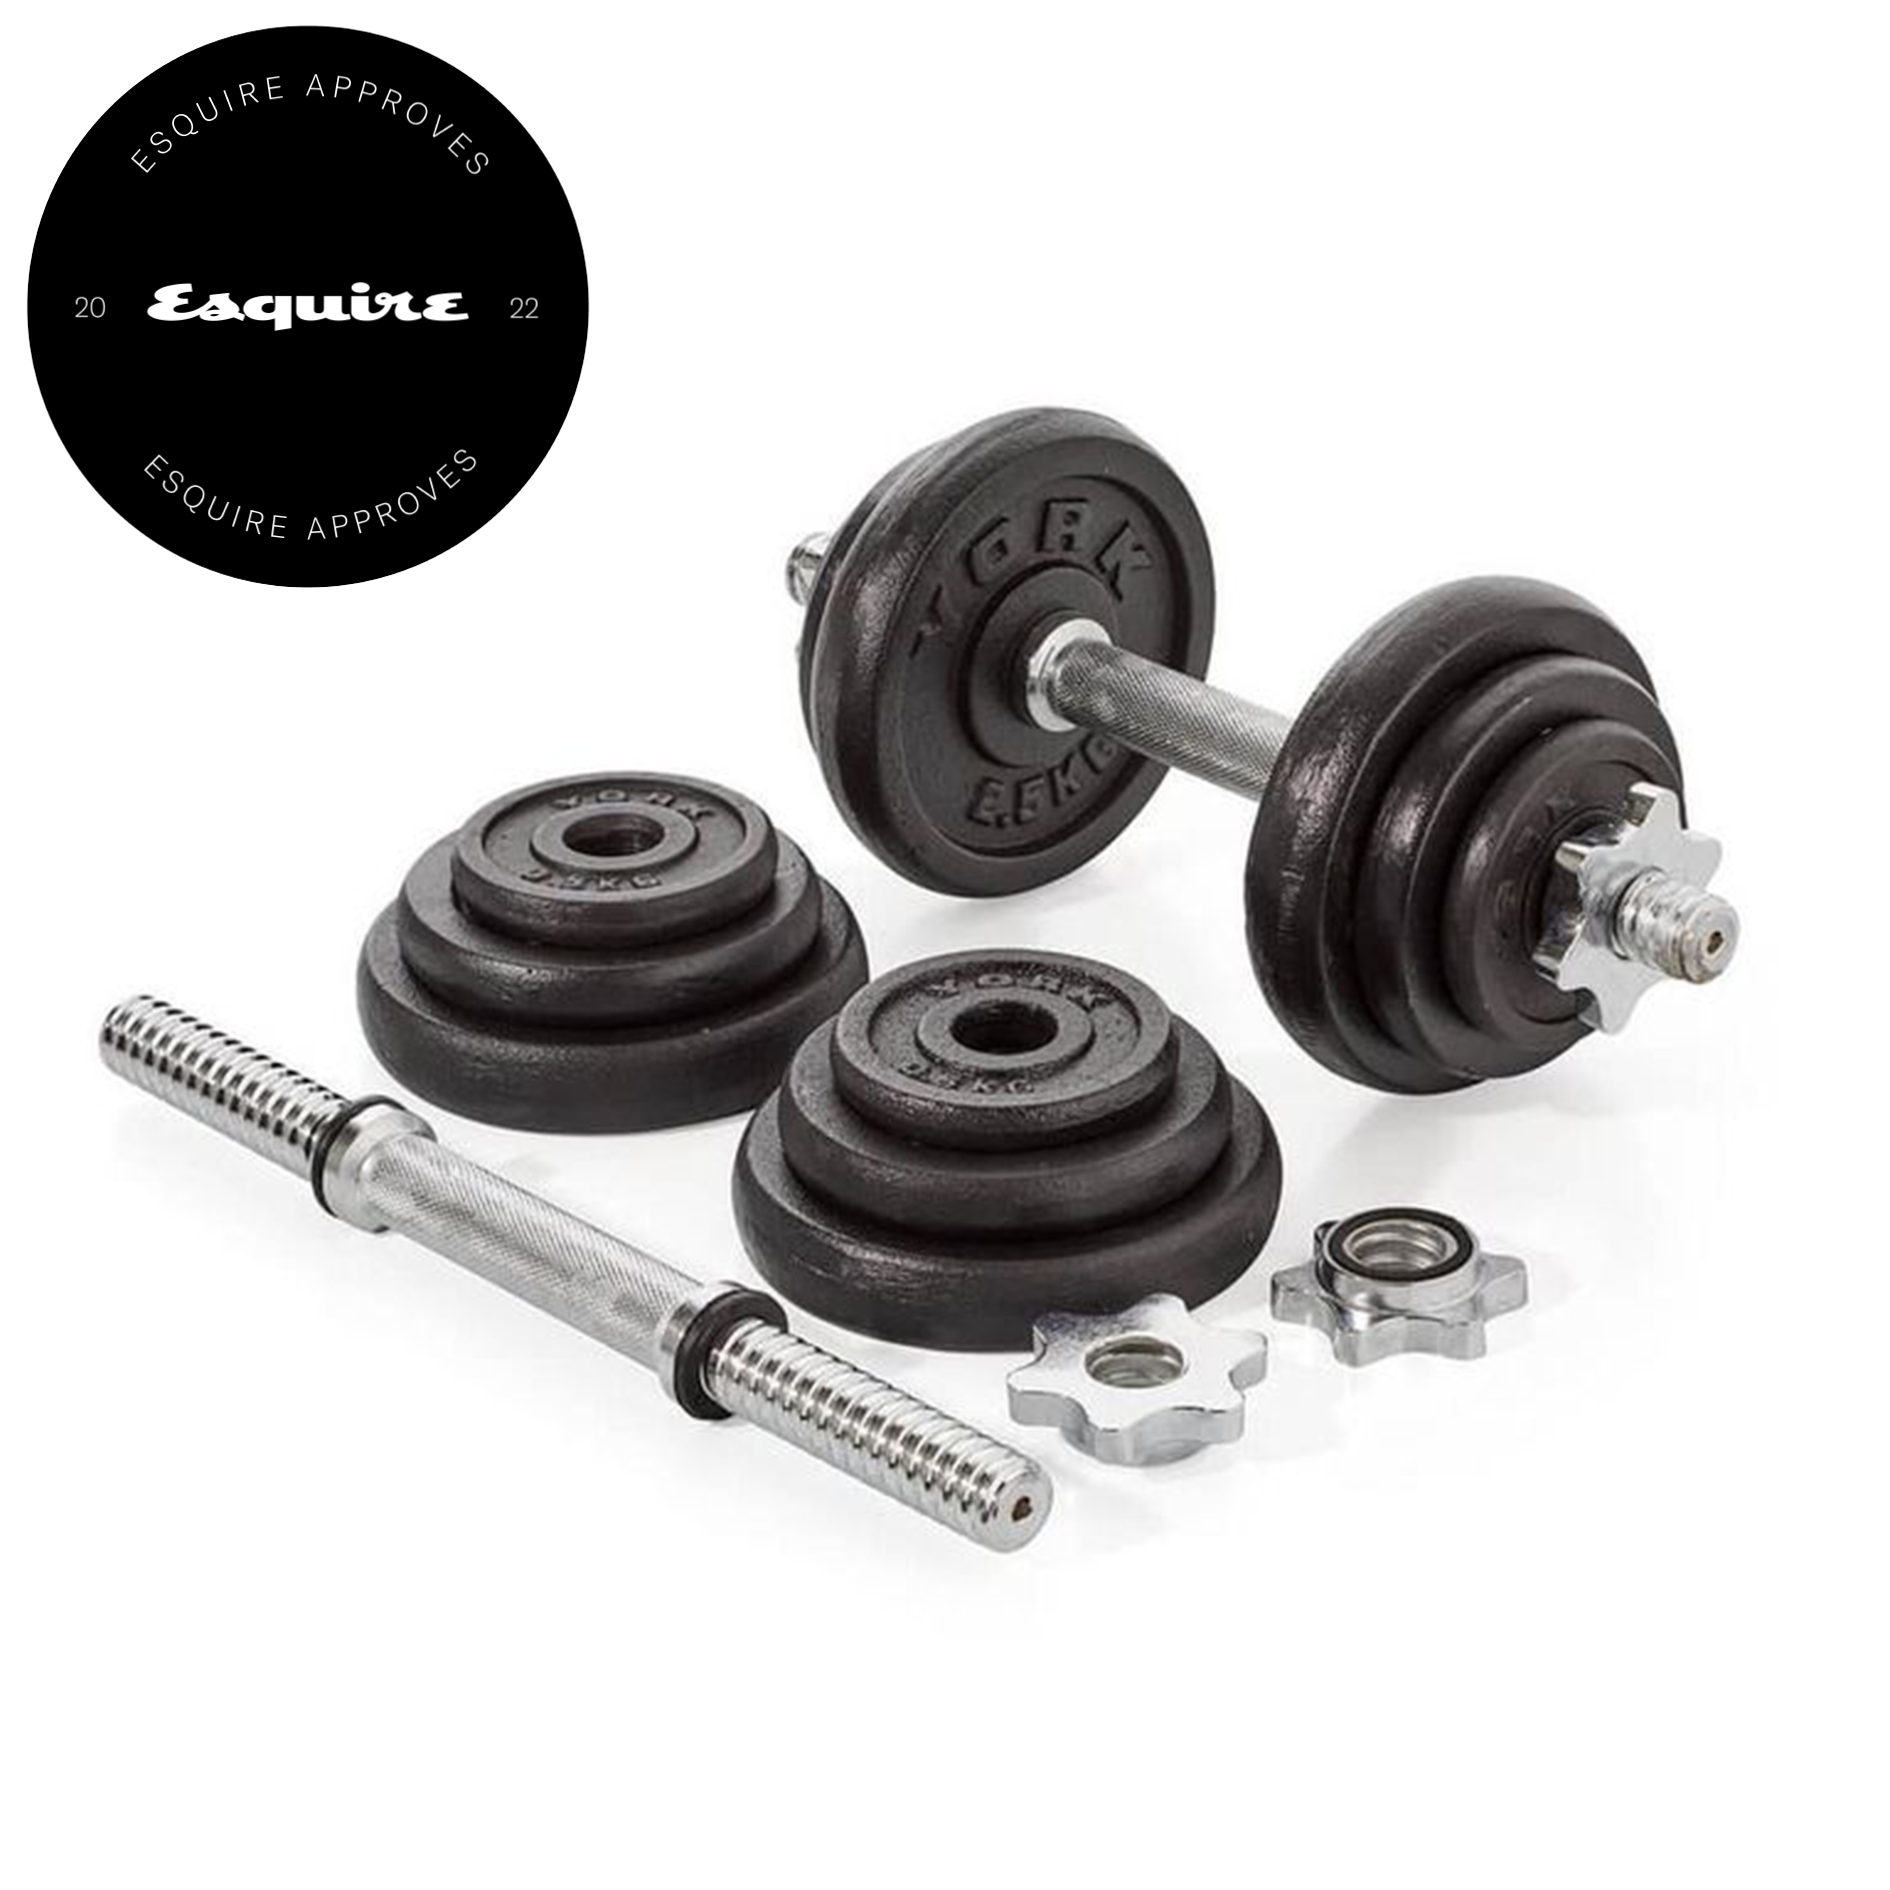 30KG Barbell & Dumbbell Set Pair Gym Body Building Free Weights Plates S03 